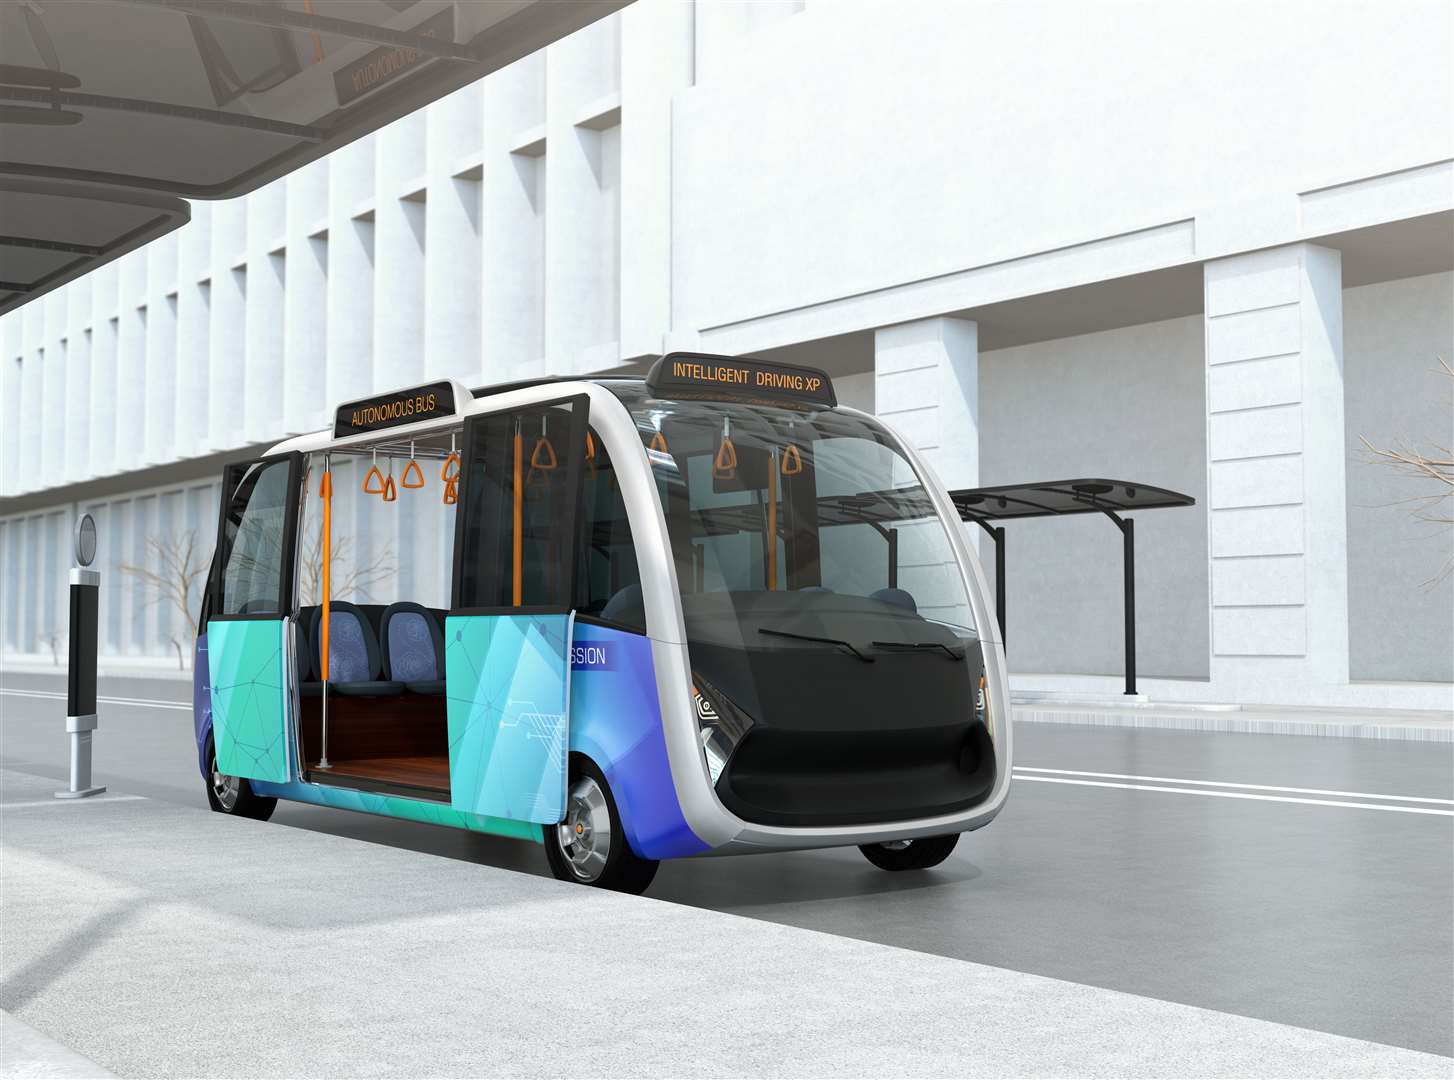 Self-driving shuttle bus waiting at bus station. The bus station equipped with solar panels for electric power.